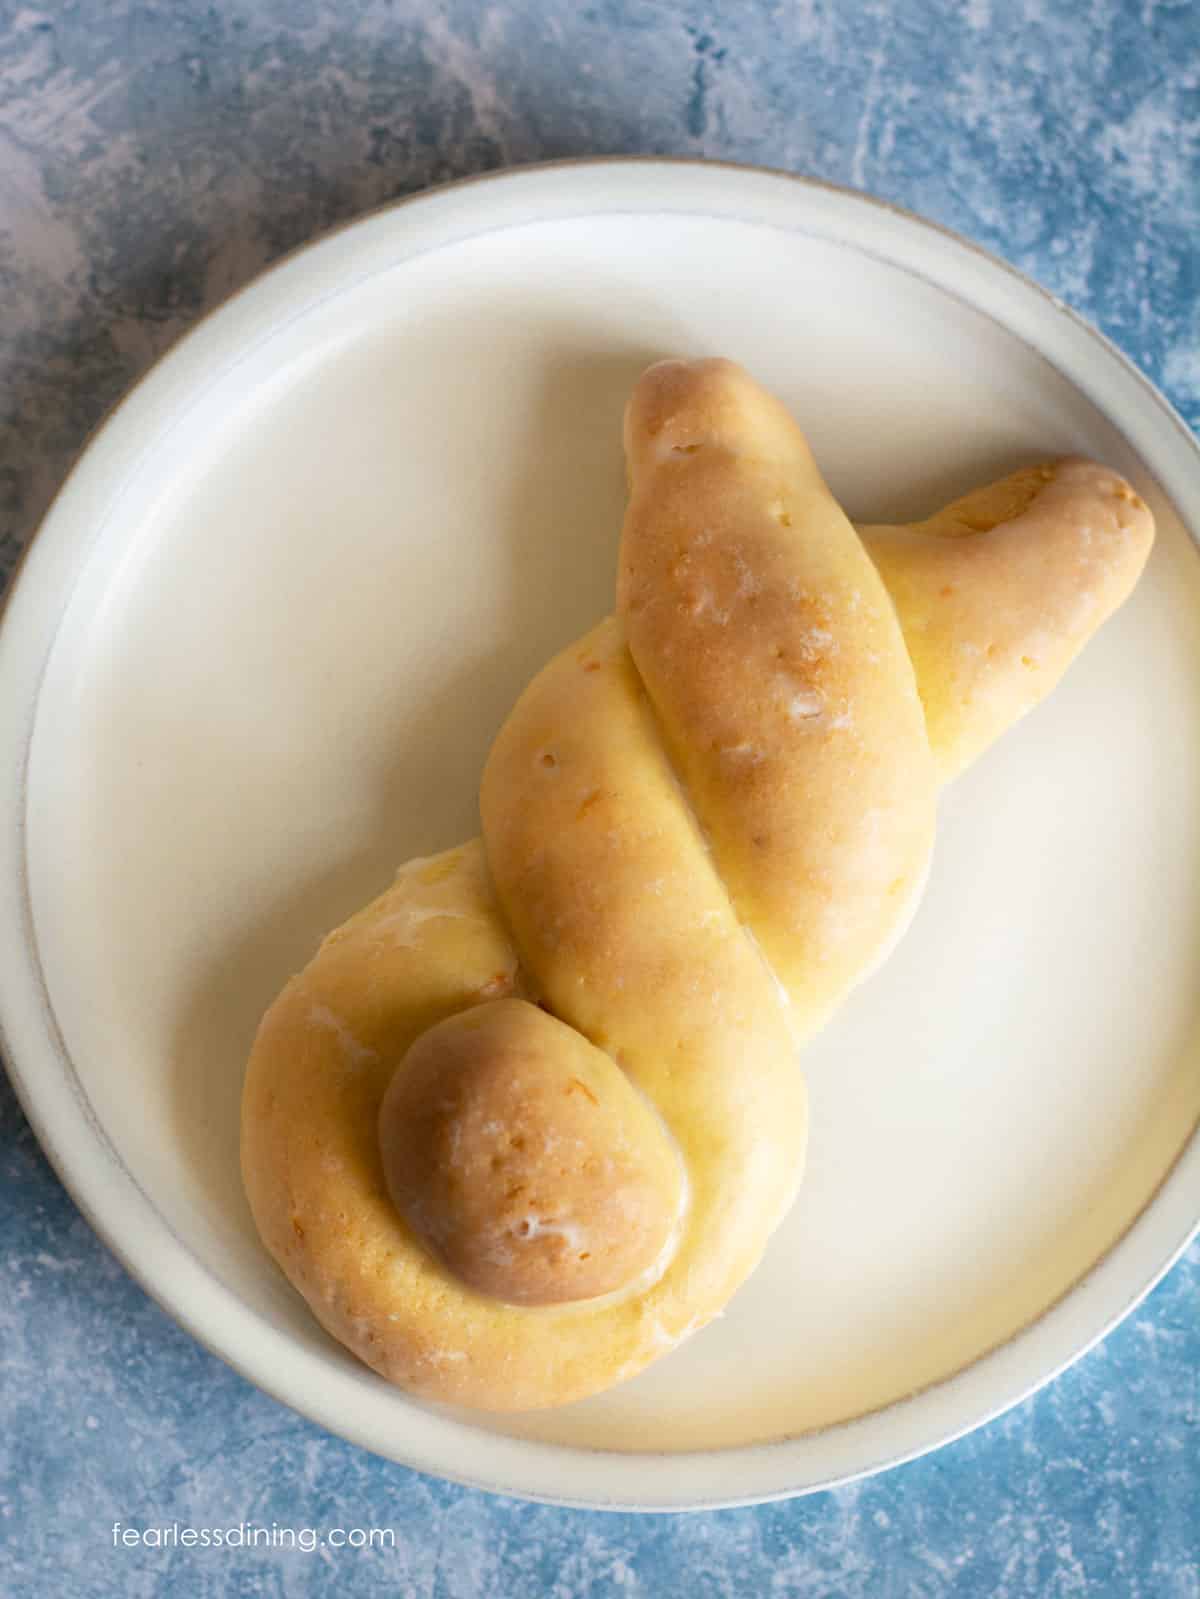 A close up of an orange bunny roll on a white plate.